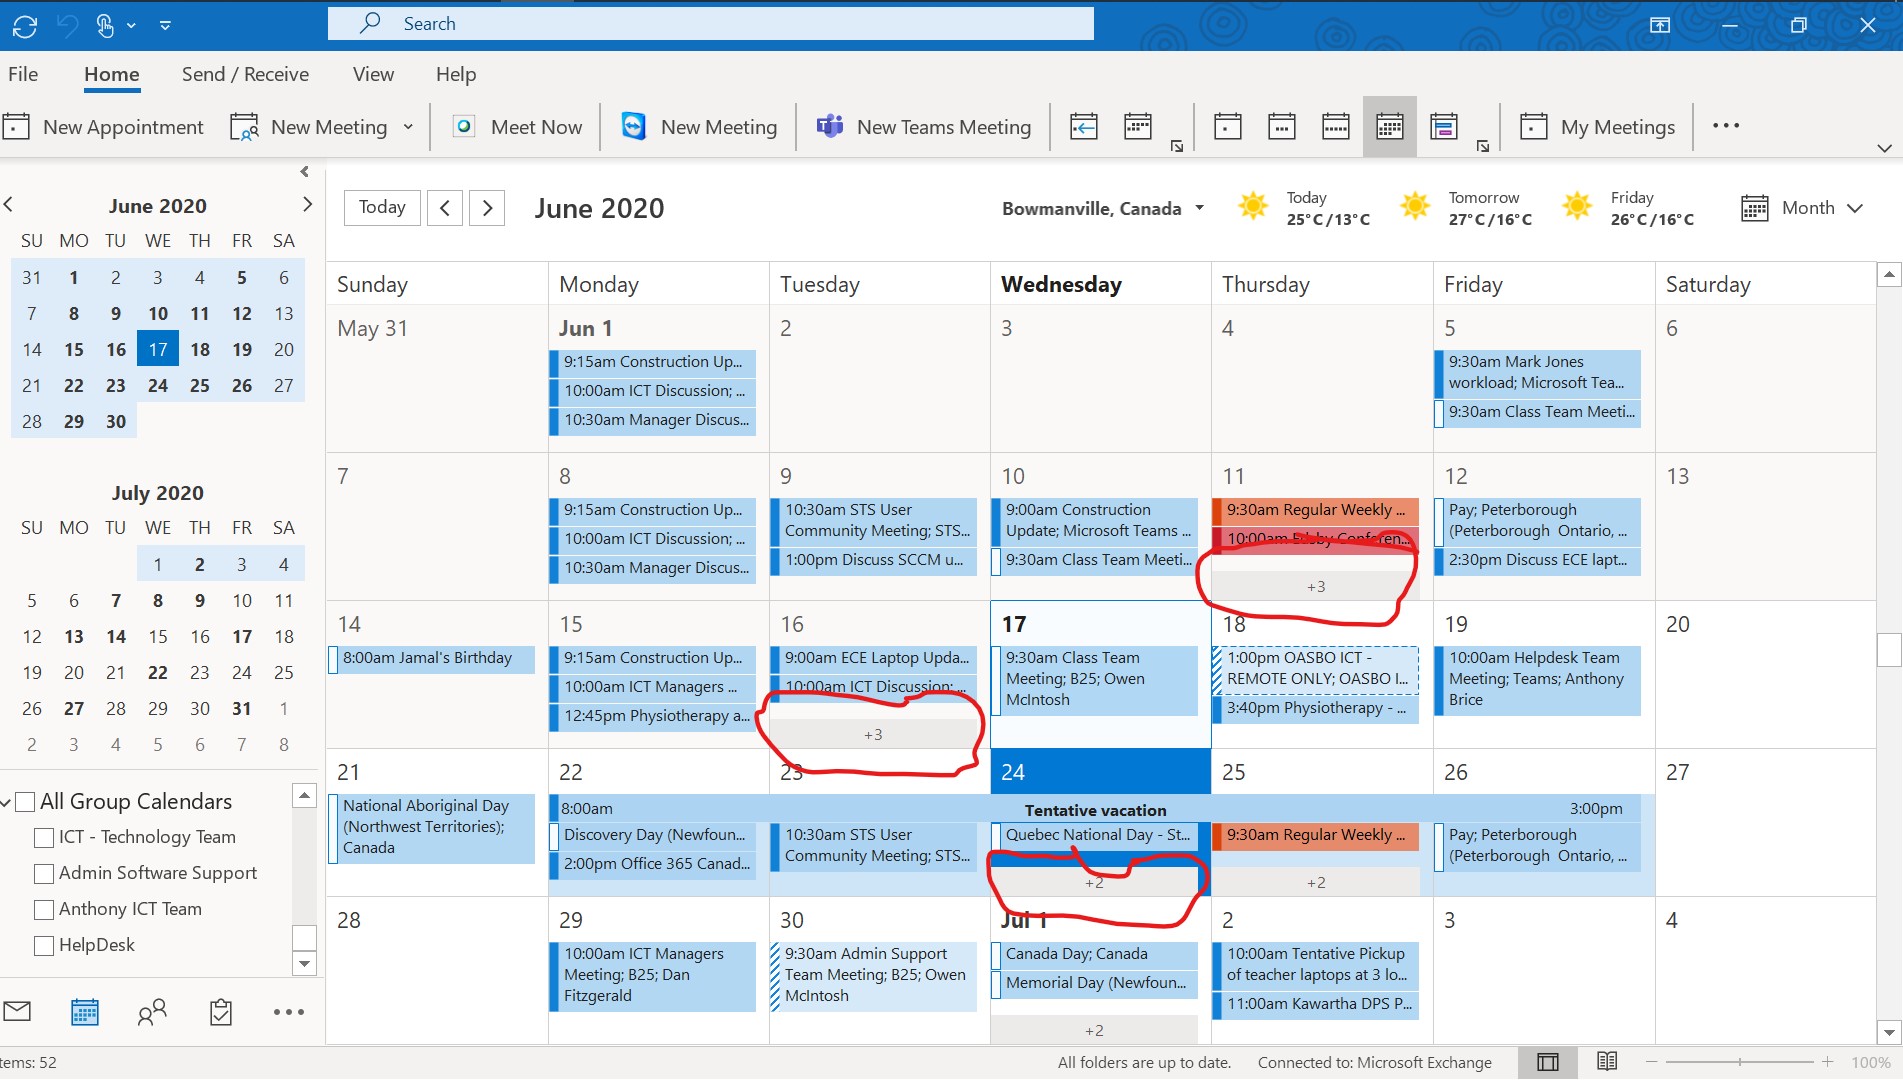 Show all calendar events in Month View; Don't hide them once there's